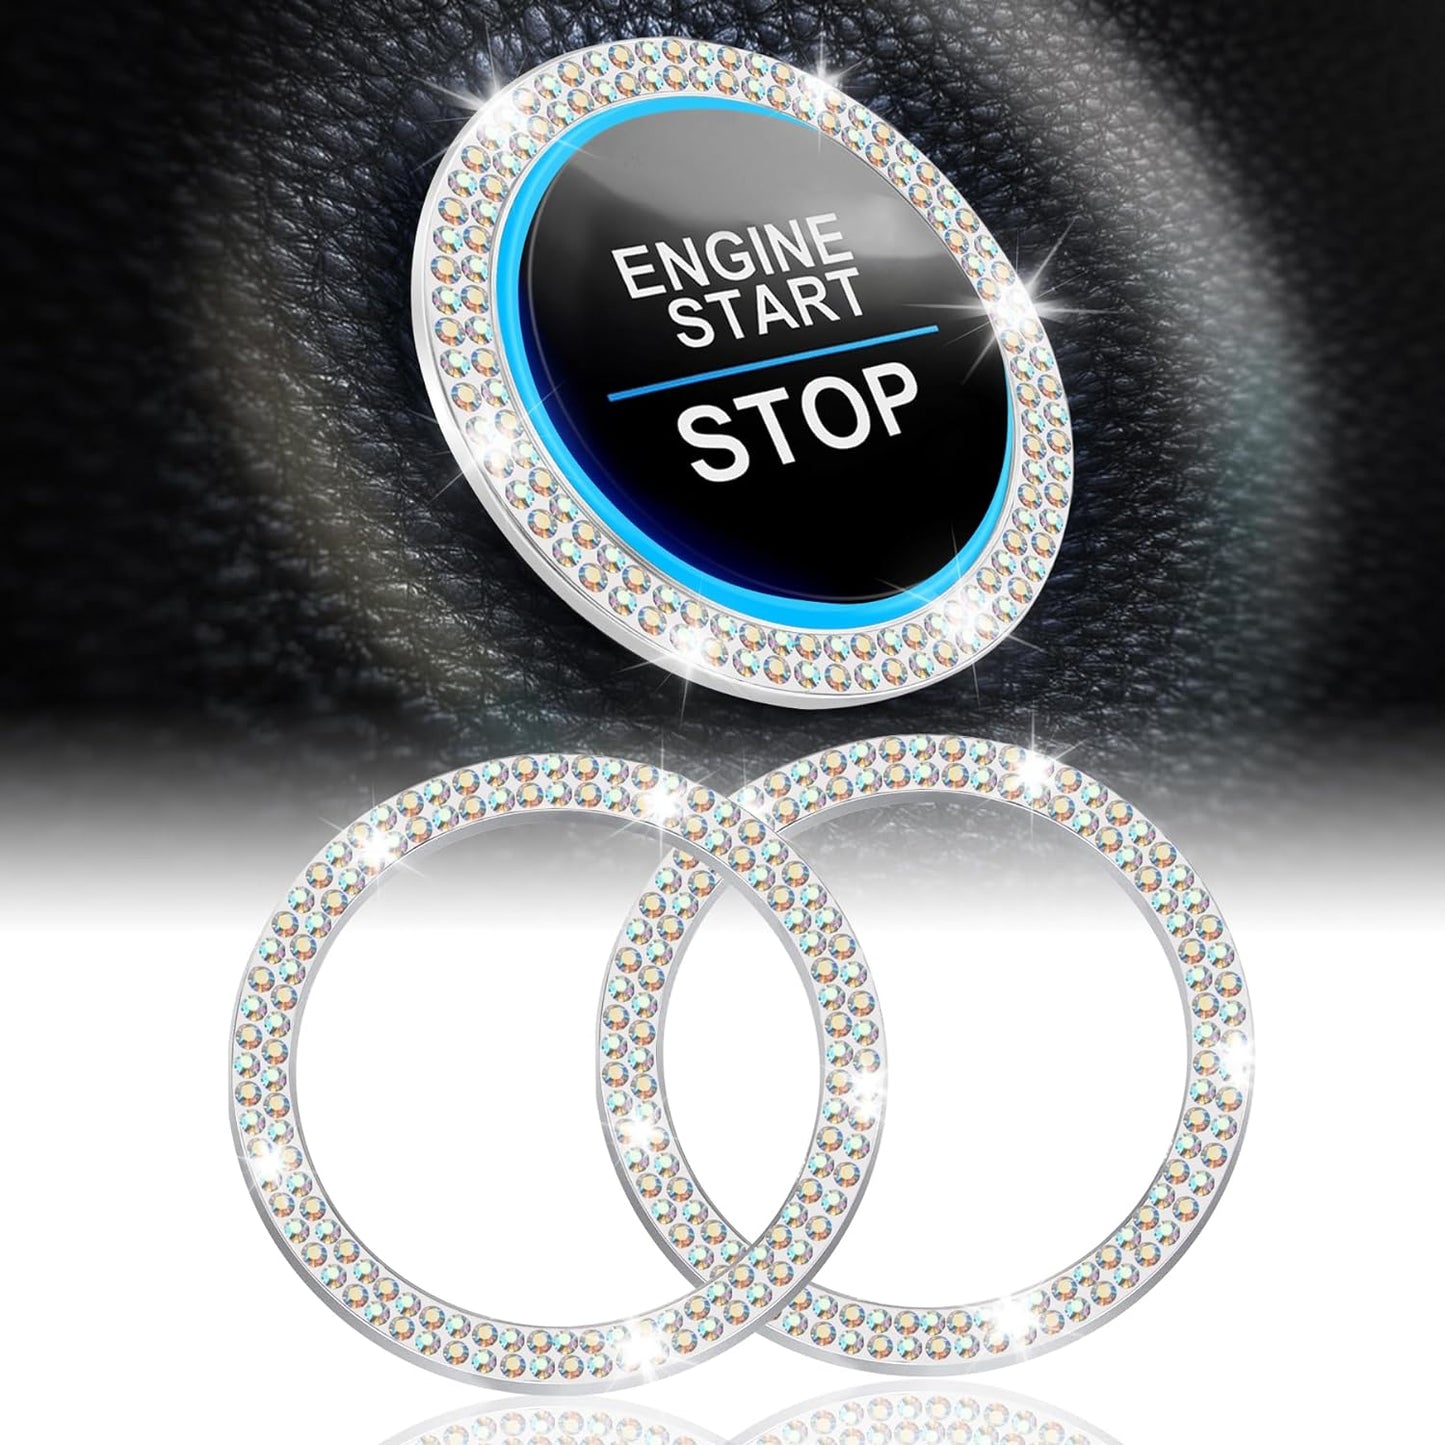 2 PCS Crystal Double Rhinestone Car Engine Start Stop Decoration Ring, Bling Car Interior Accessories for Women, Push to Start Button Cover/Sticker, Key Ignition & Knob Bling Ring, White